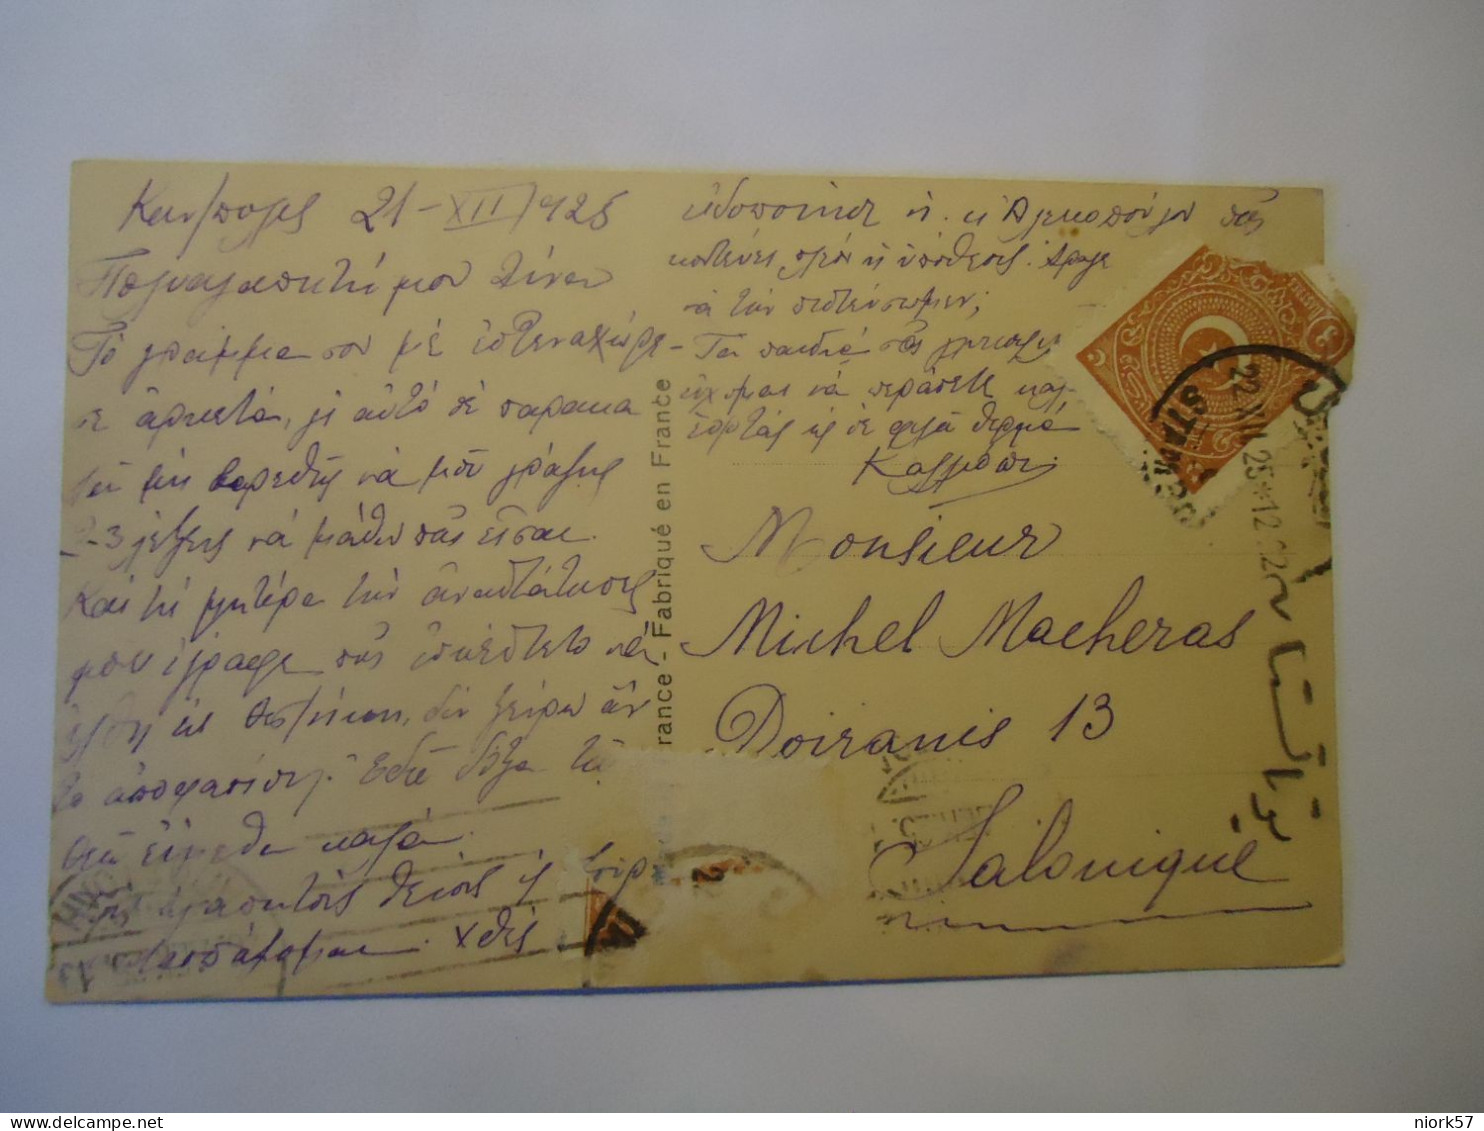 GREECE TURKEY  POSTCARDS  CHILDEN GIRLS 1925  WITH STAMPS AND POSTMARK POSTED ΘΕΣΣΑΛΟΝΙΚΗ - Grèce